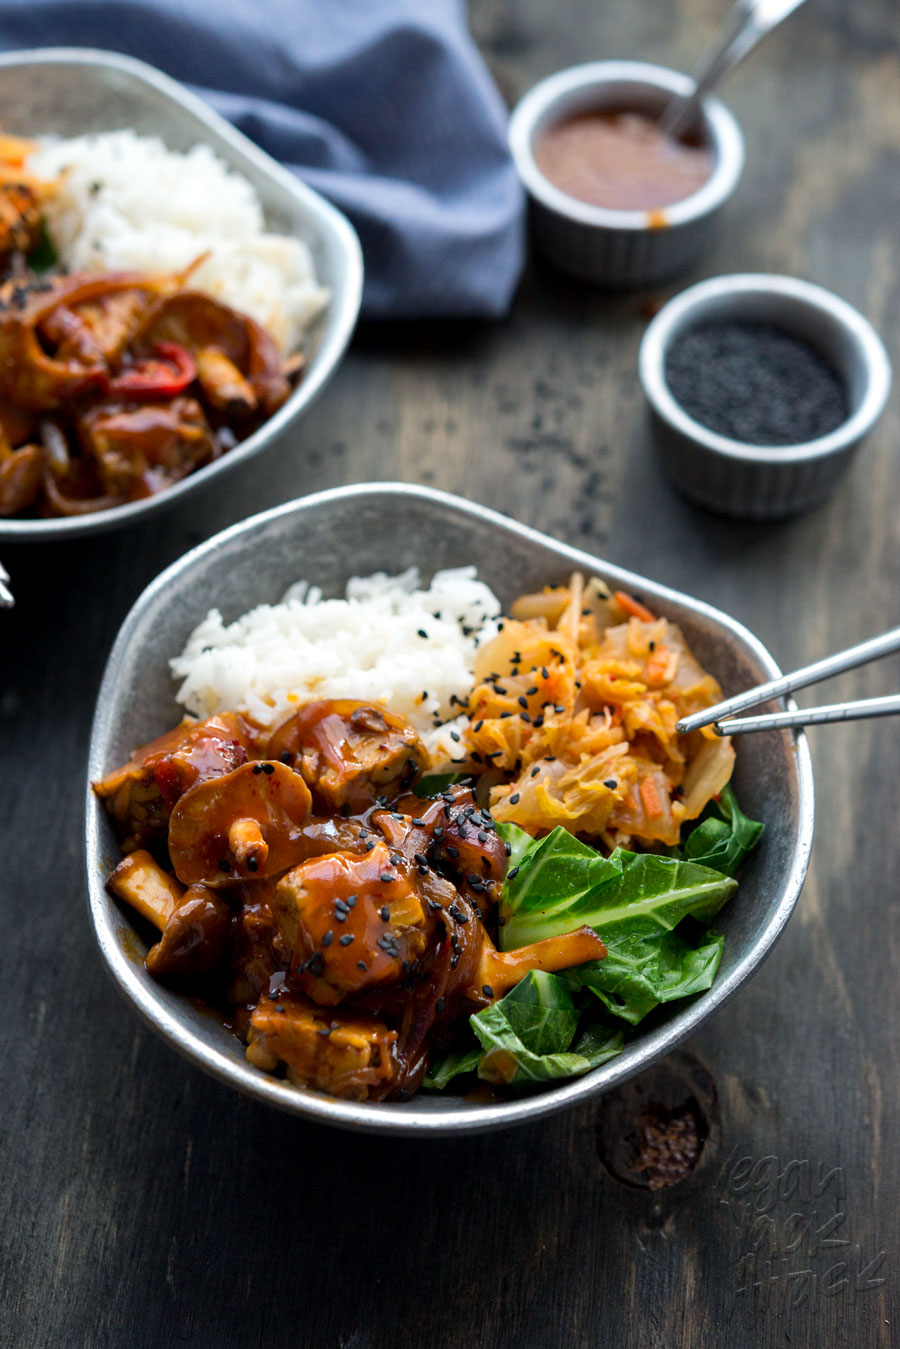 Bowl of Korean-style simmered tempeh with rice, kimchi, and greens on a black table